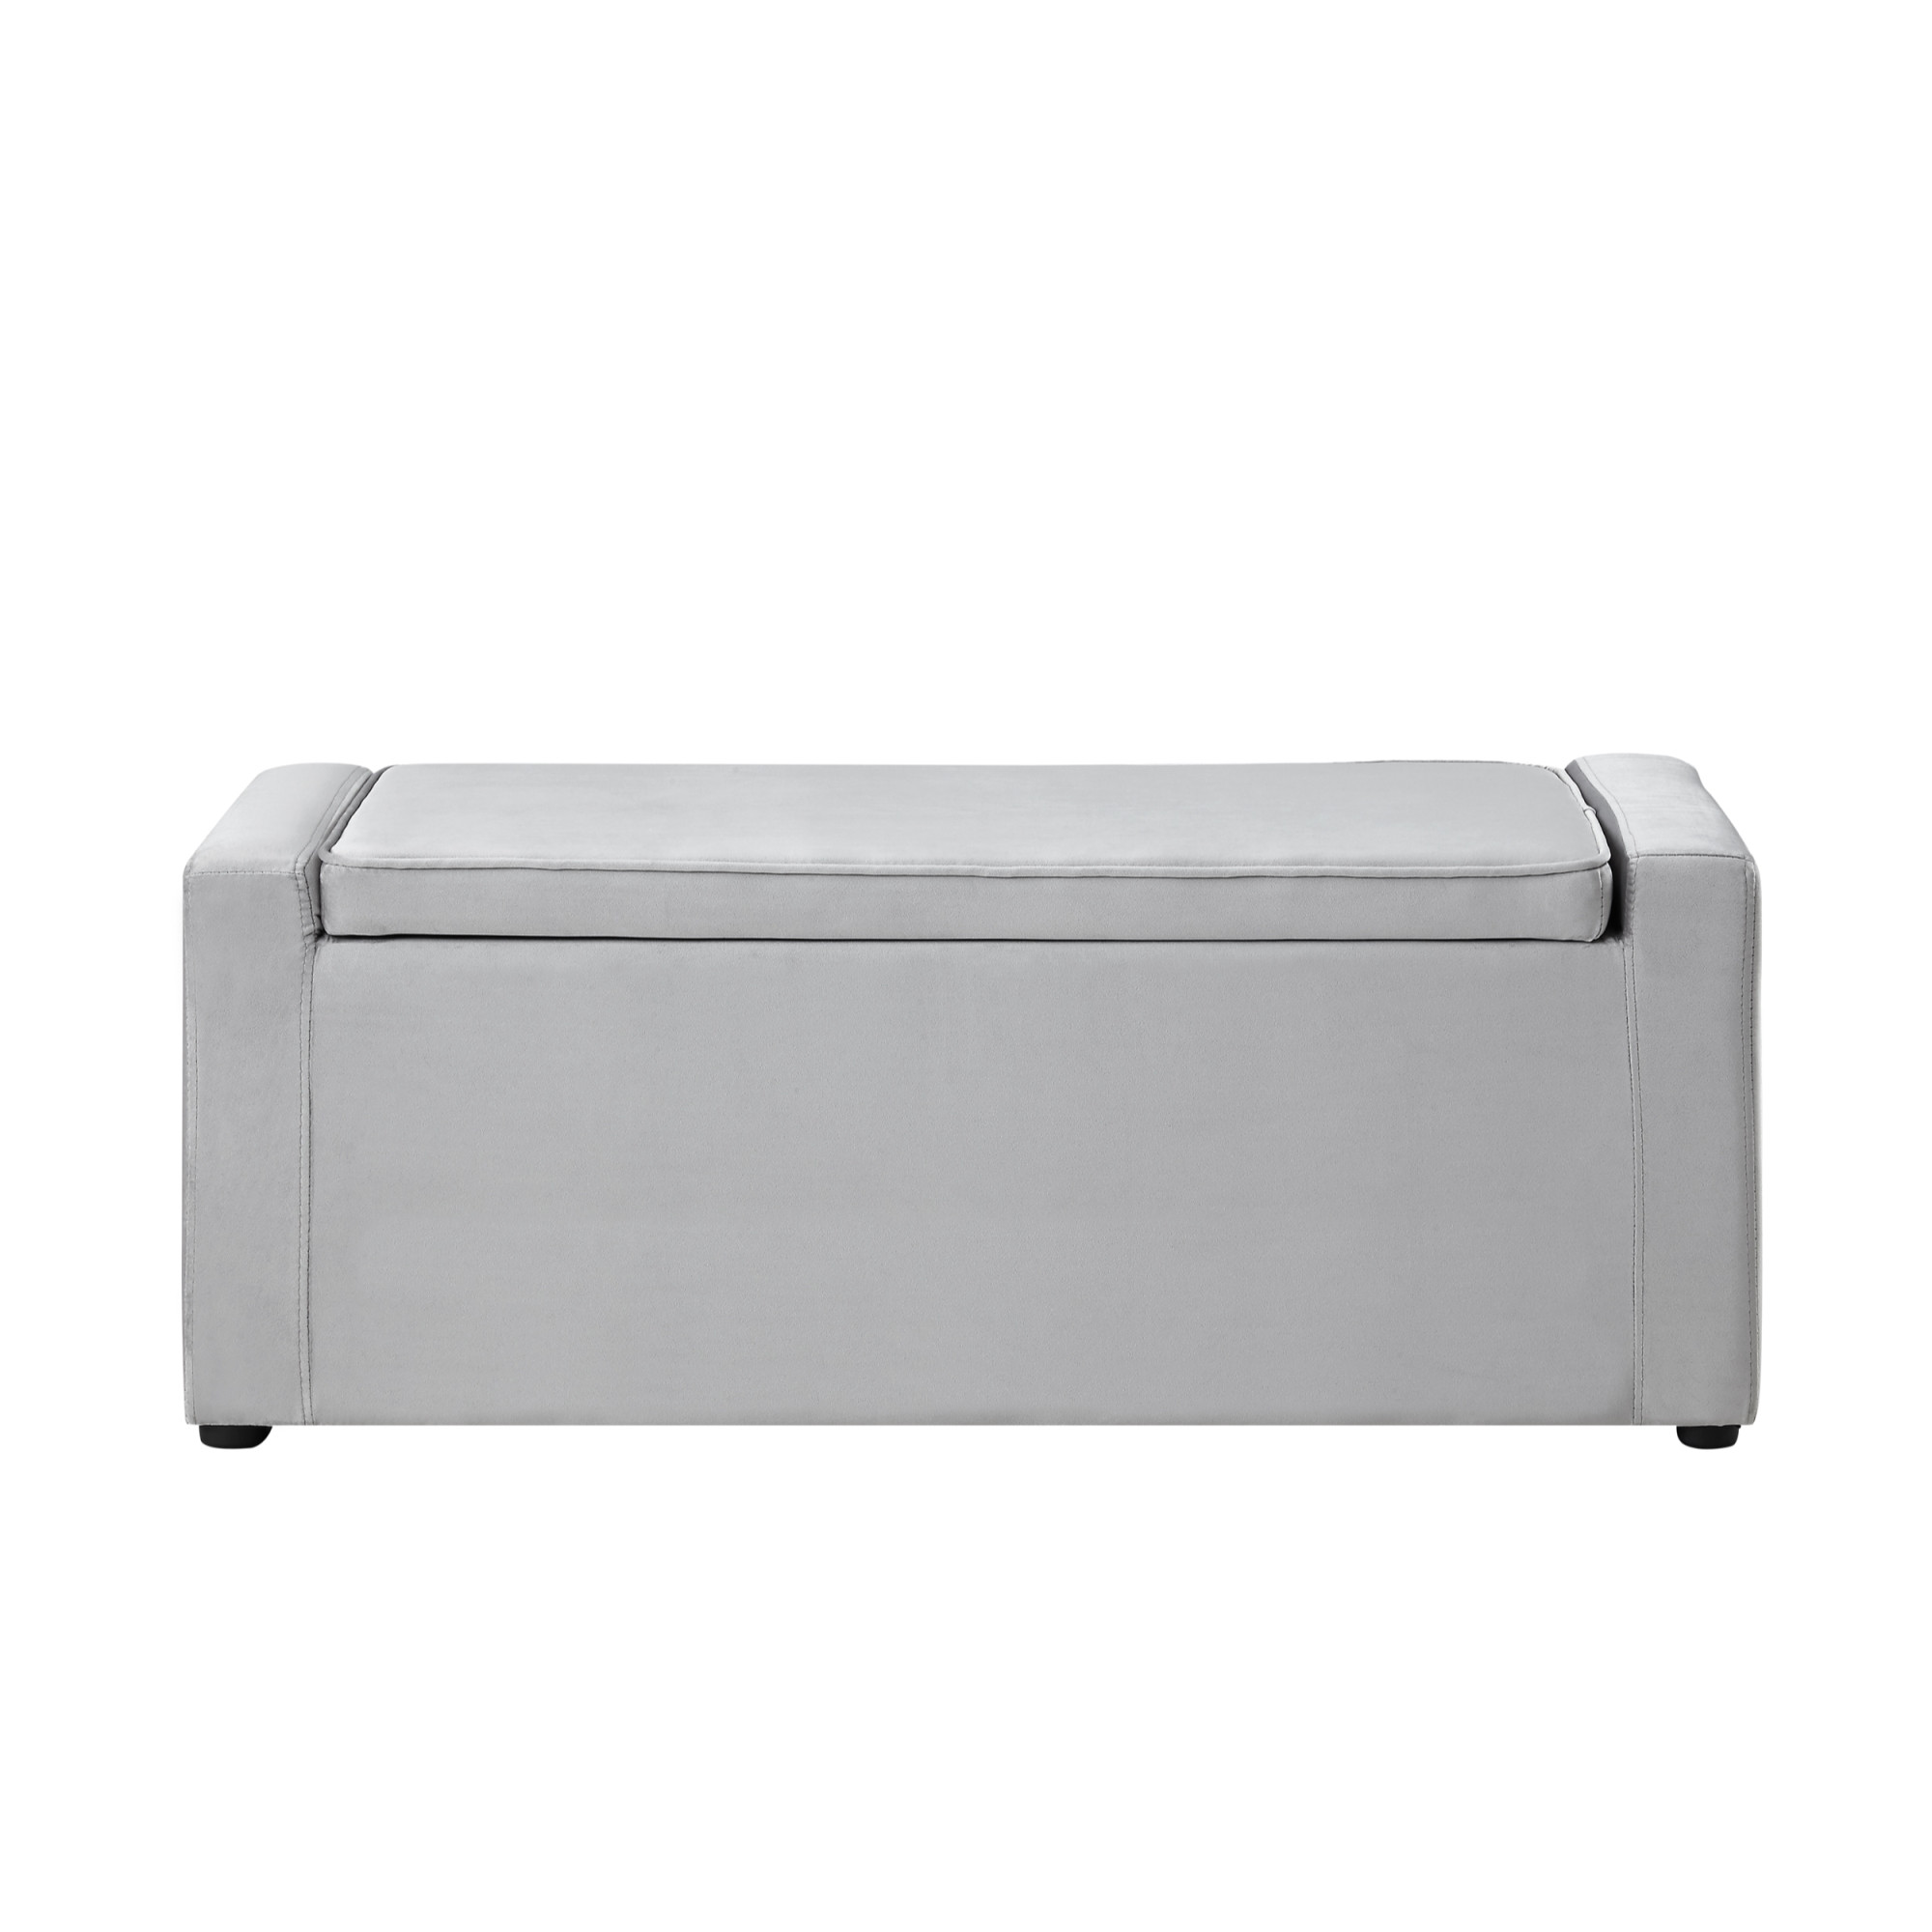 47" Gray and Black Upholstered Velvet Bench with Flip top, Shoe Storage-530671-1